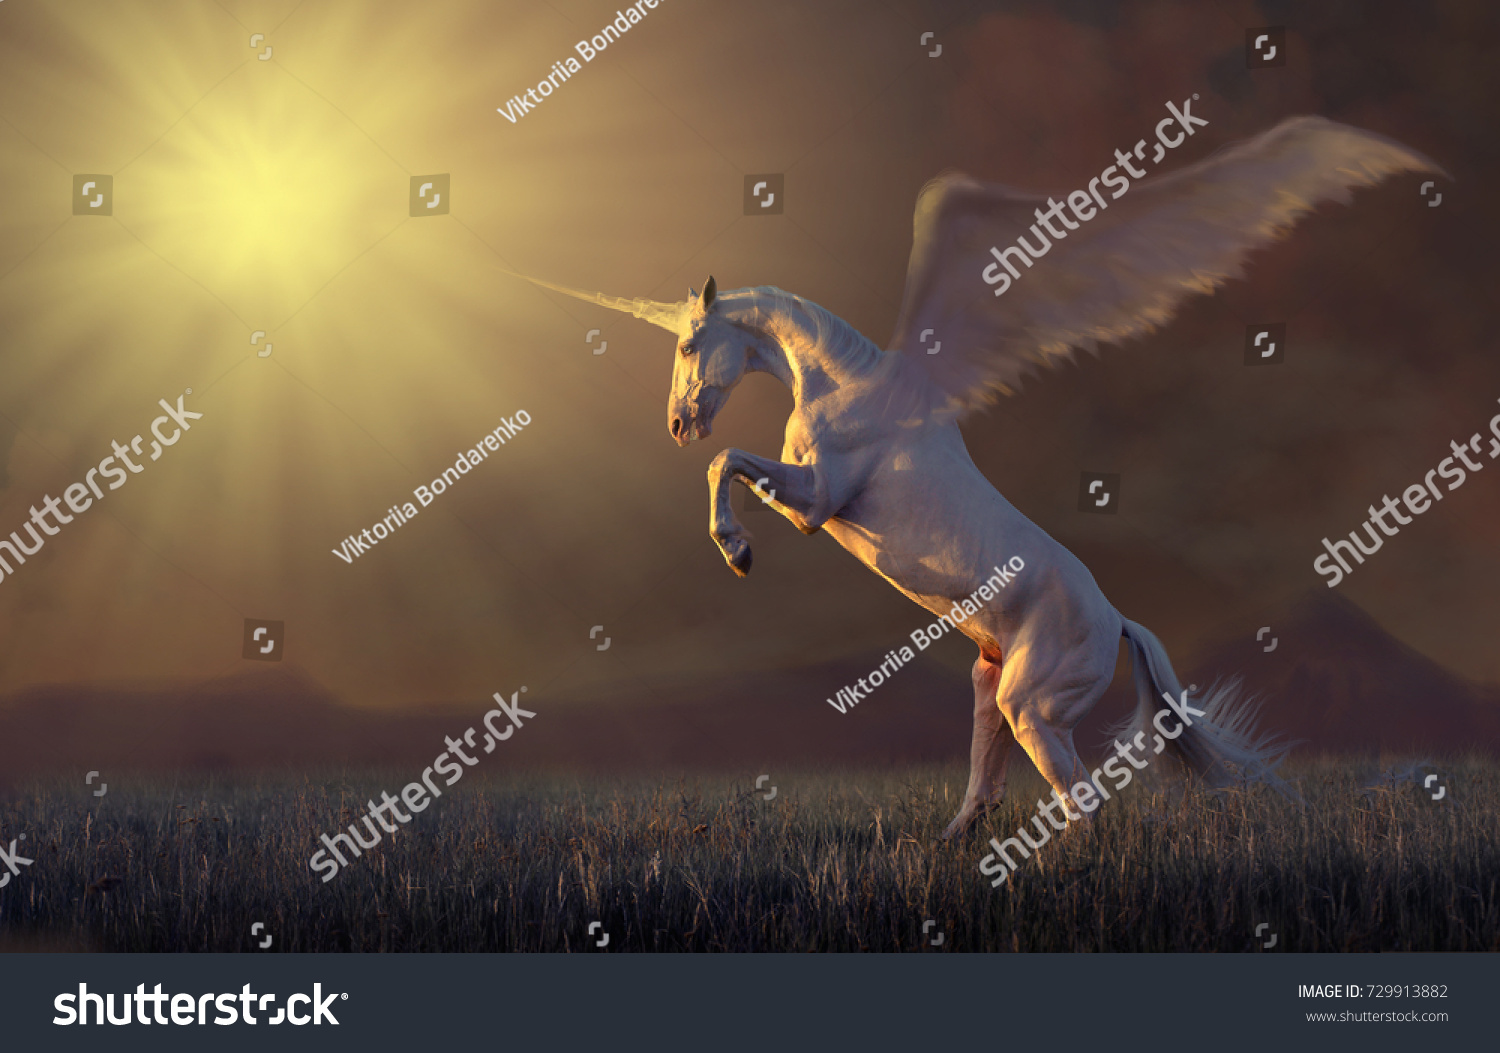 Pink unicorn with the wings reared in the grass on mountains background #729913882